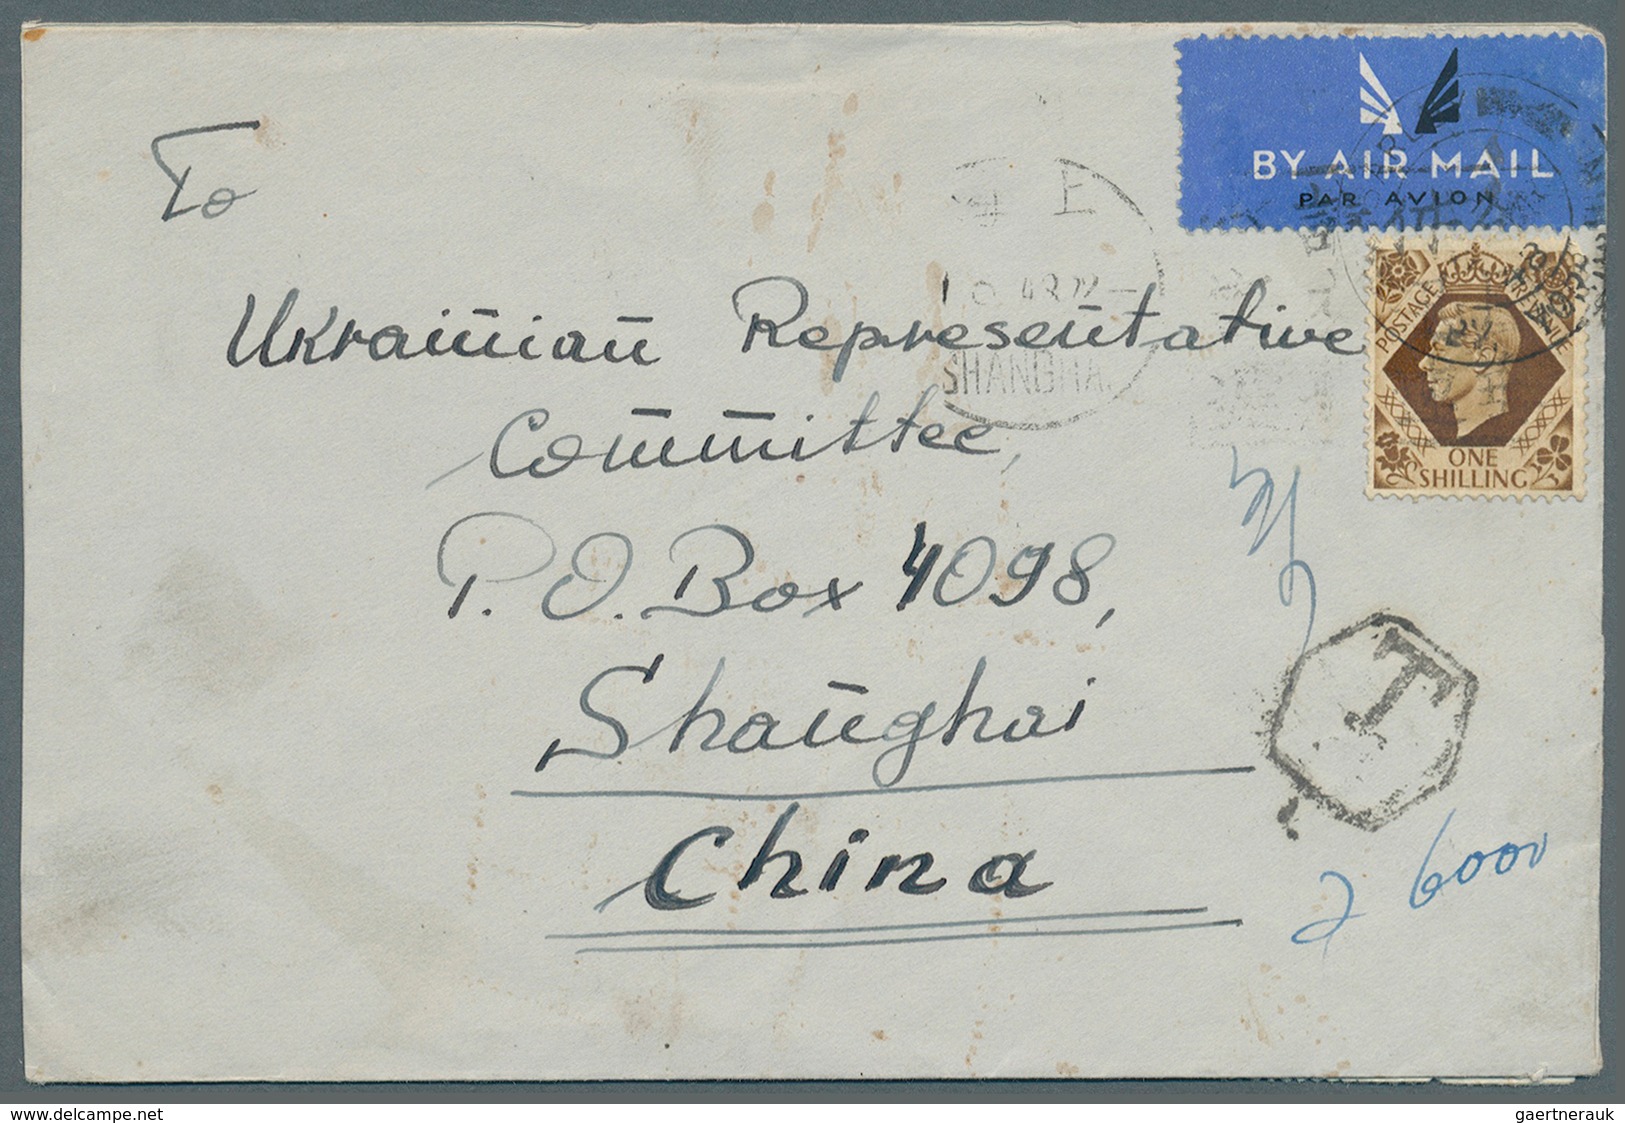 China - Portomarken: 1948. Air Mail Envelope (opened At Three Sides) Addressed To Shanghai, China Be - Postage Due